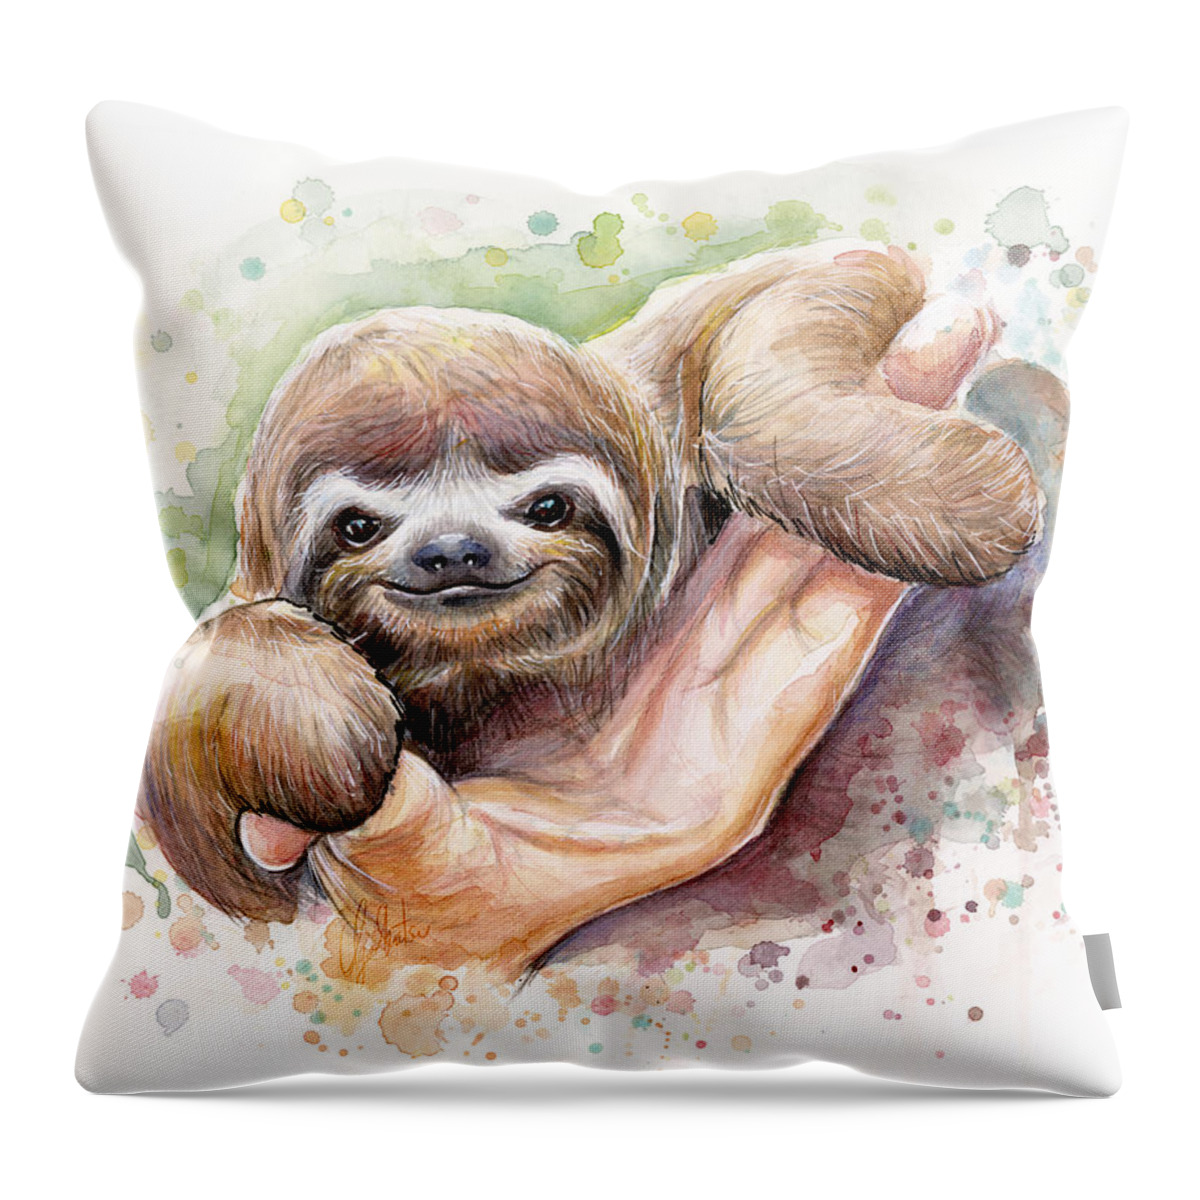 Sloth Throw Pillow featuring the painting Baby Sloth Watercolor by Olga Shvartsur